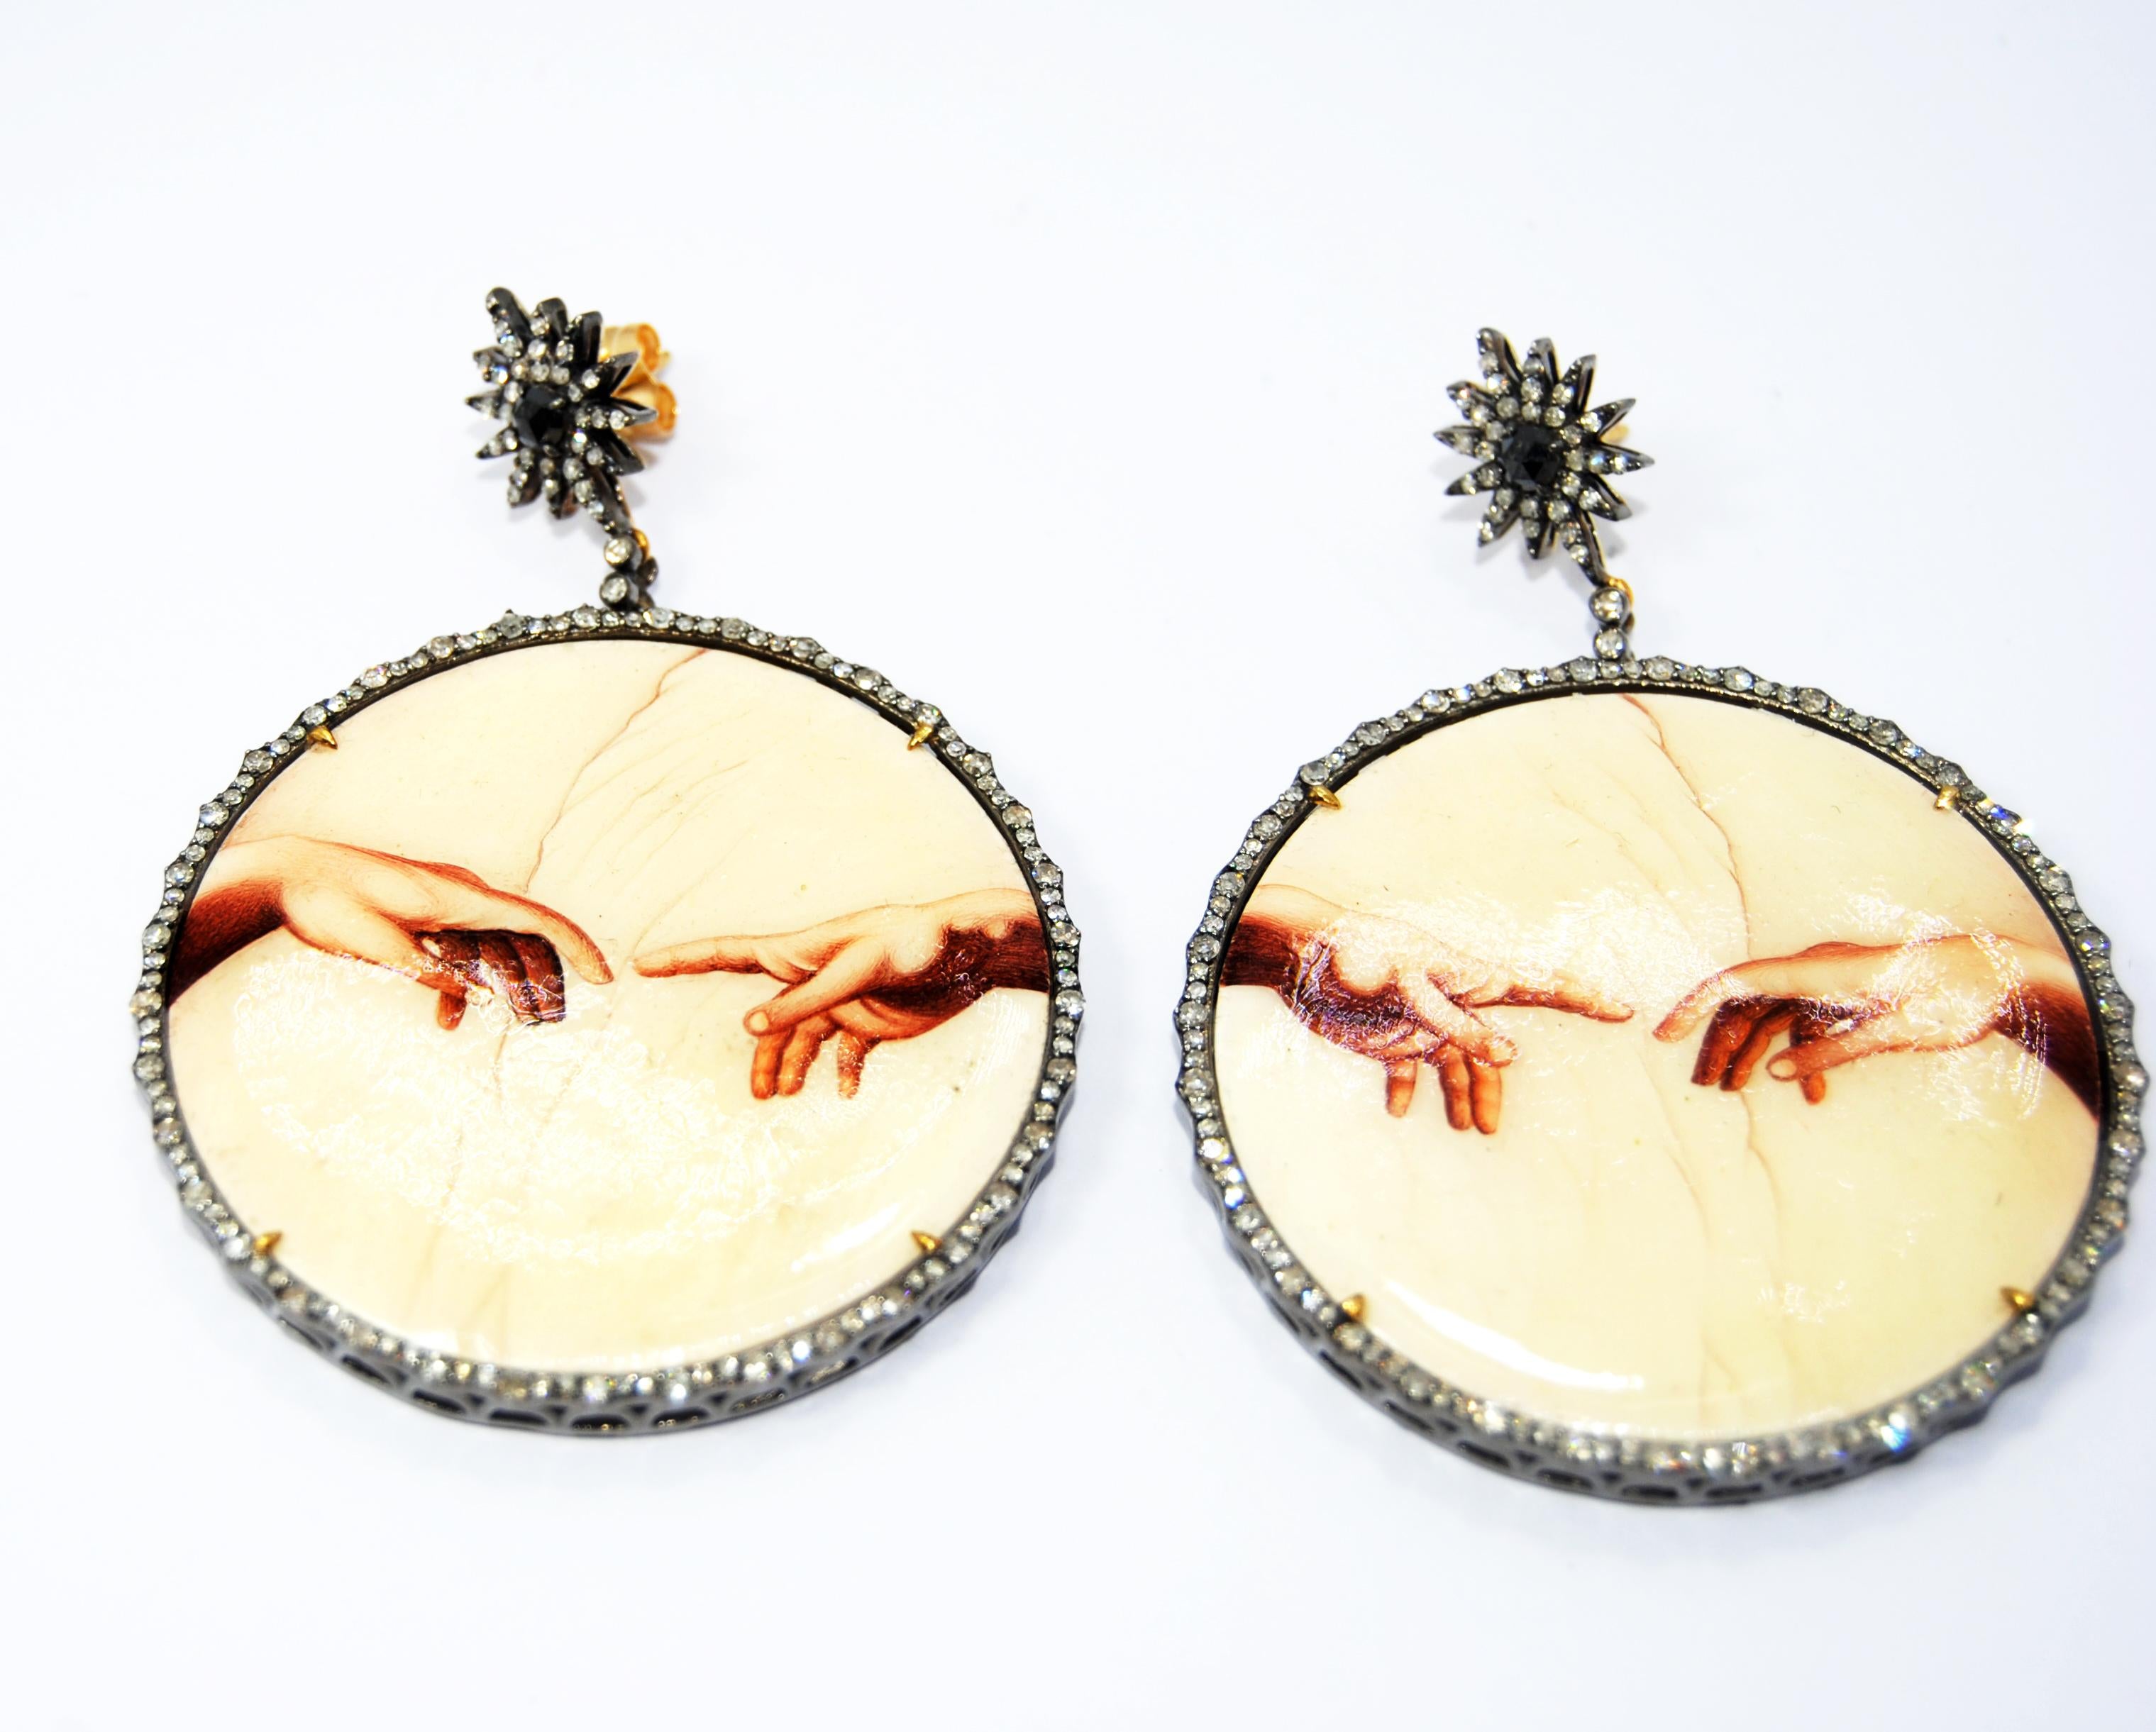 Irama Pradera is a Young designer from Spain that searches always for the best gems and combines classic with contemporary mounting and styles. 
Sleekly crafted in 18K yellow gold, painted bakelite and silver  these talisman dangle earrings are a